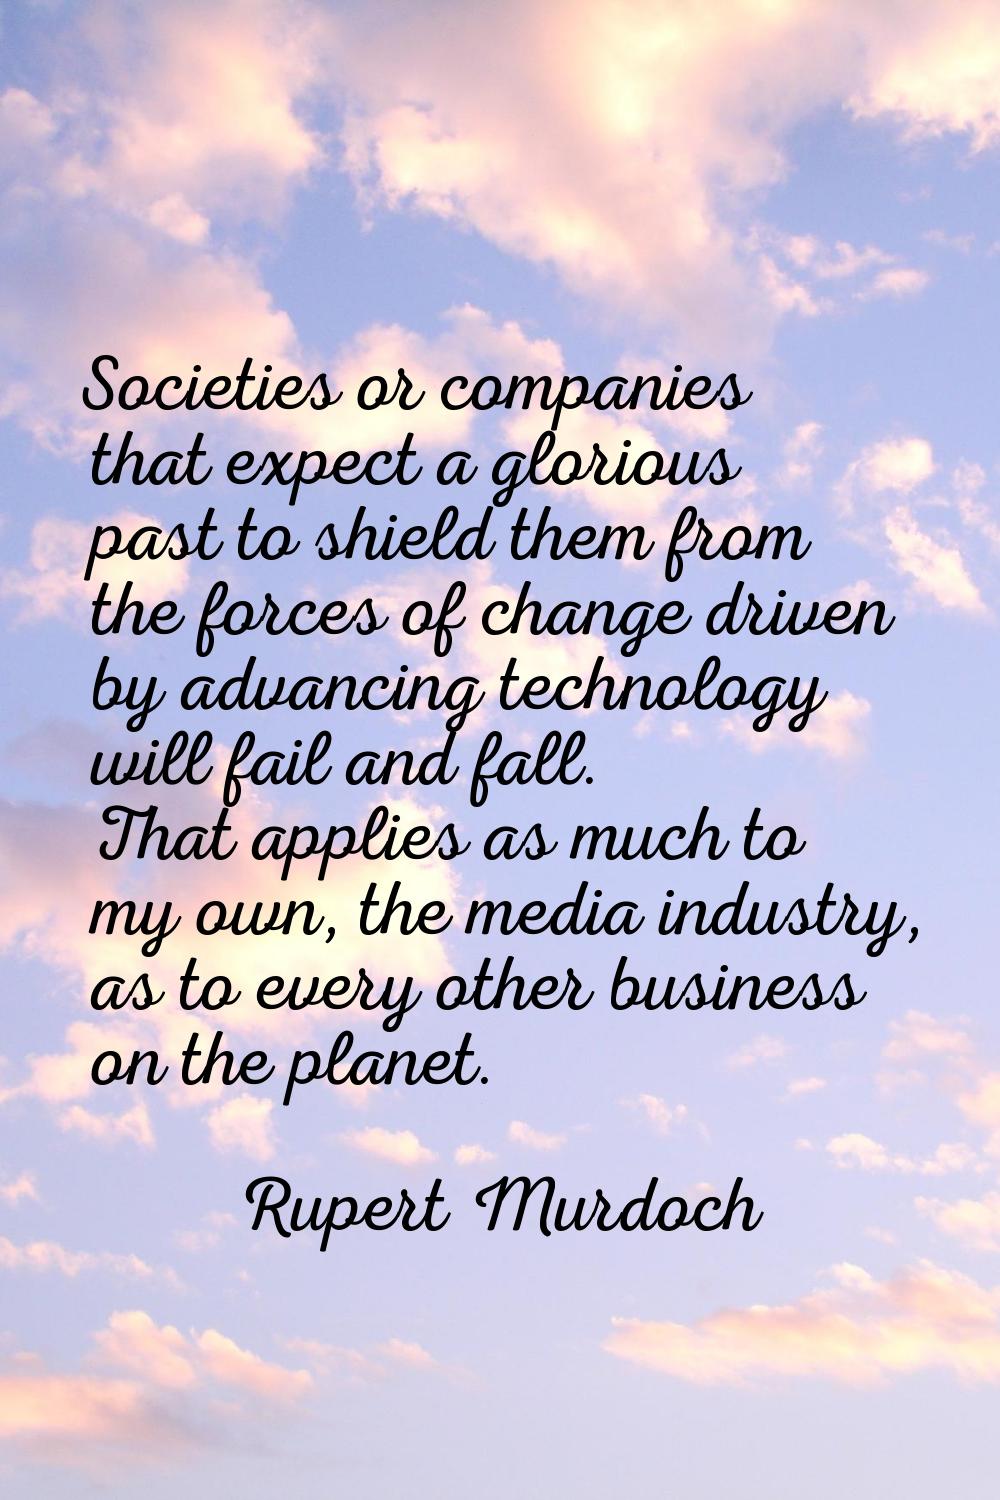 Societies or companies that expect a glorious past to shield them from the forces of change driven 